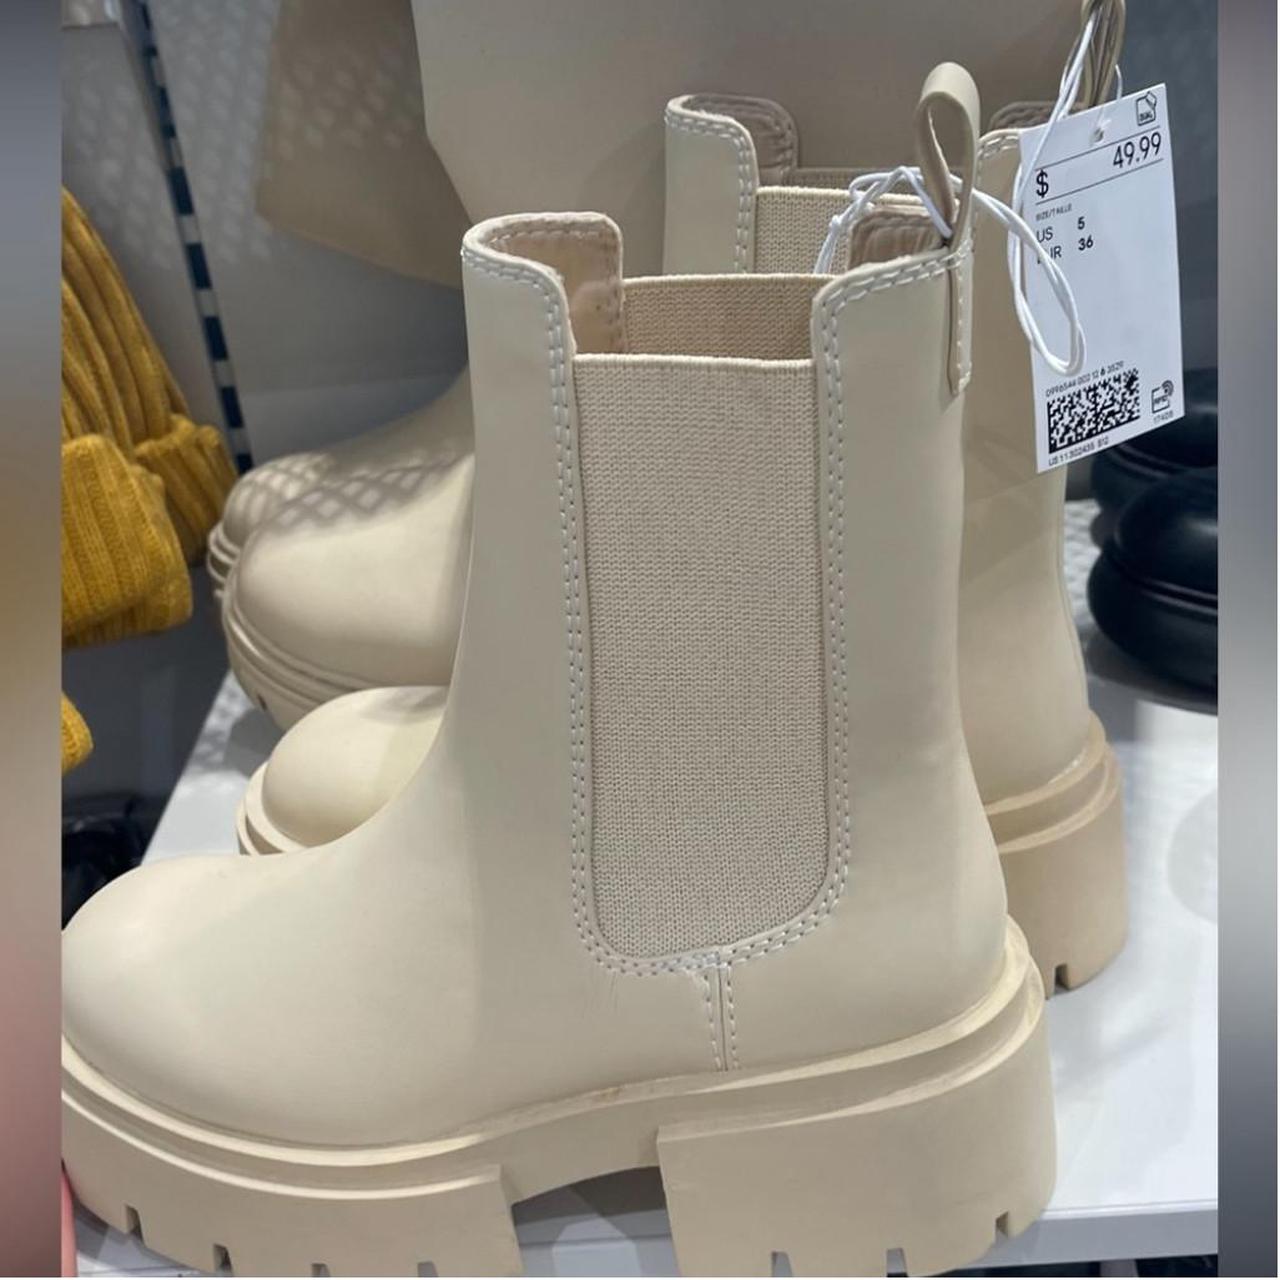 H&M Women's Cream and White Boots | Depop